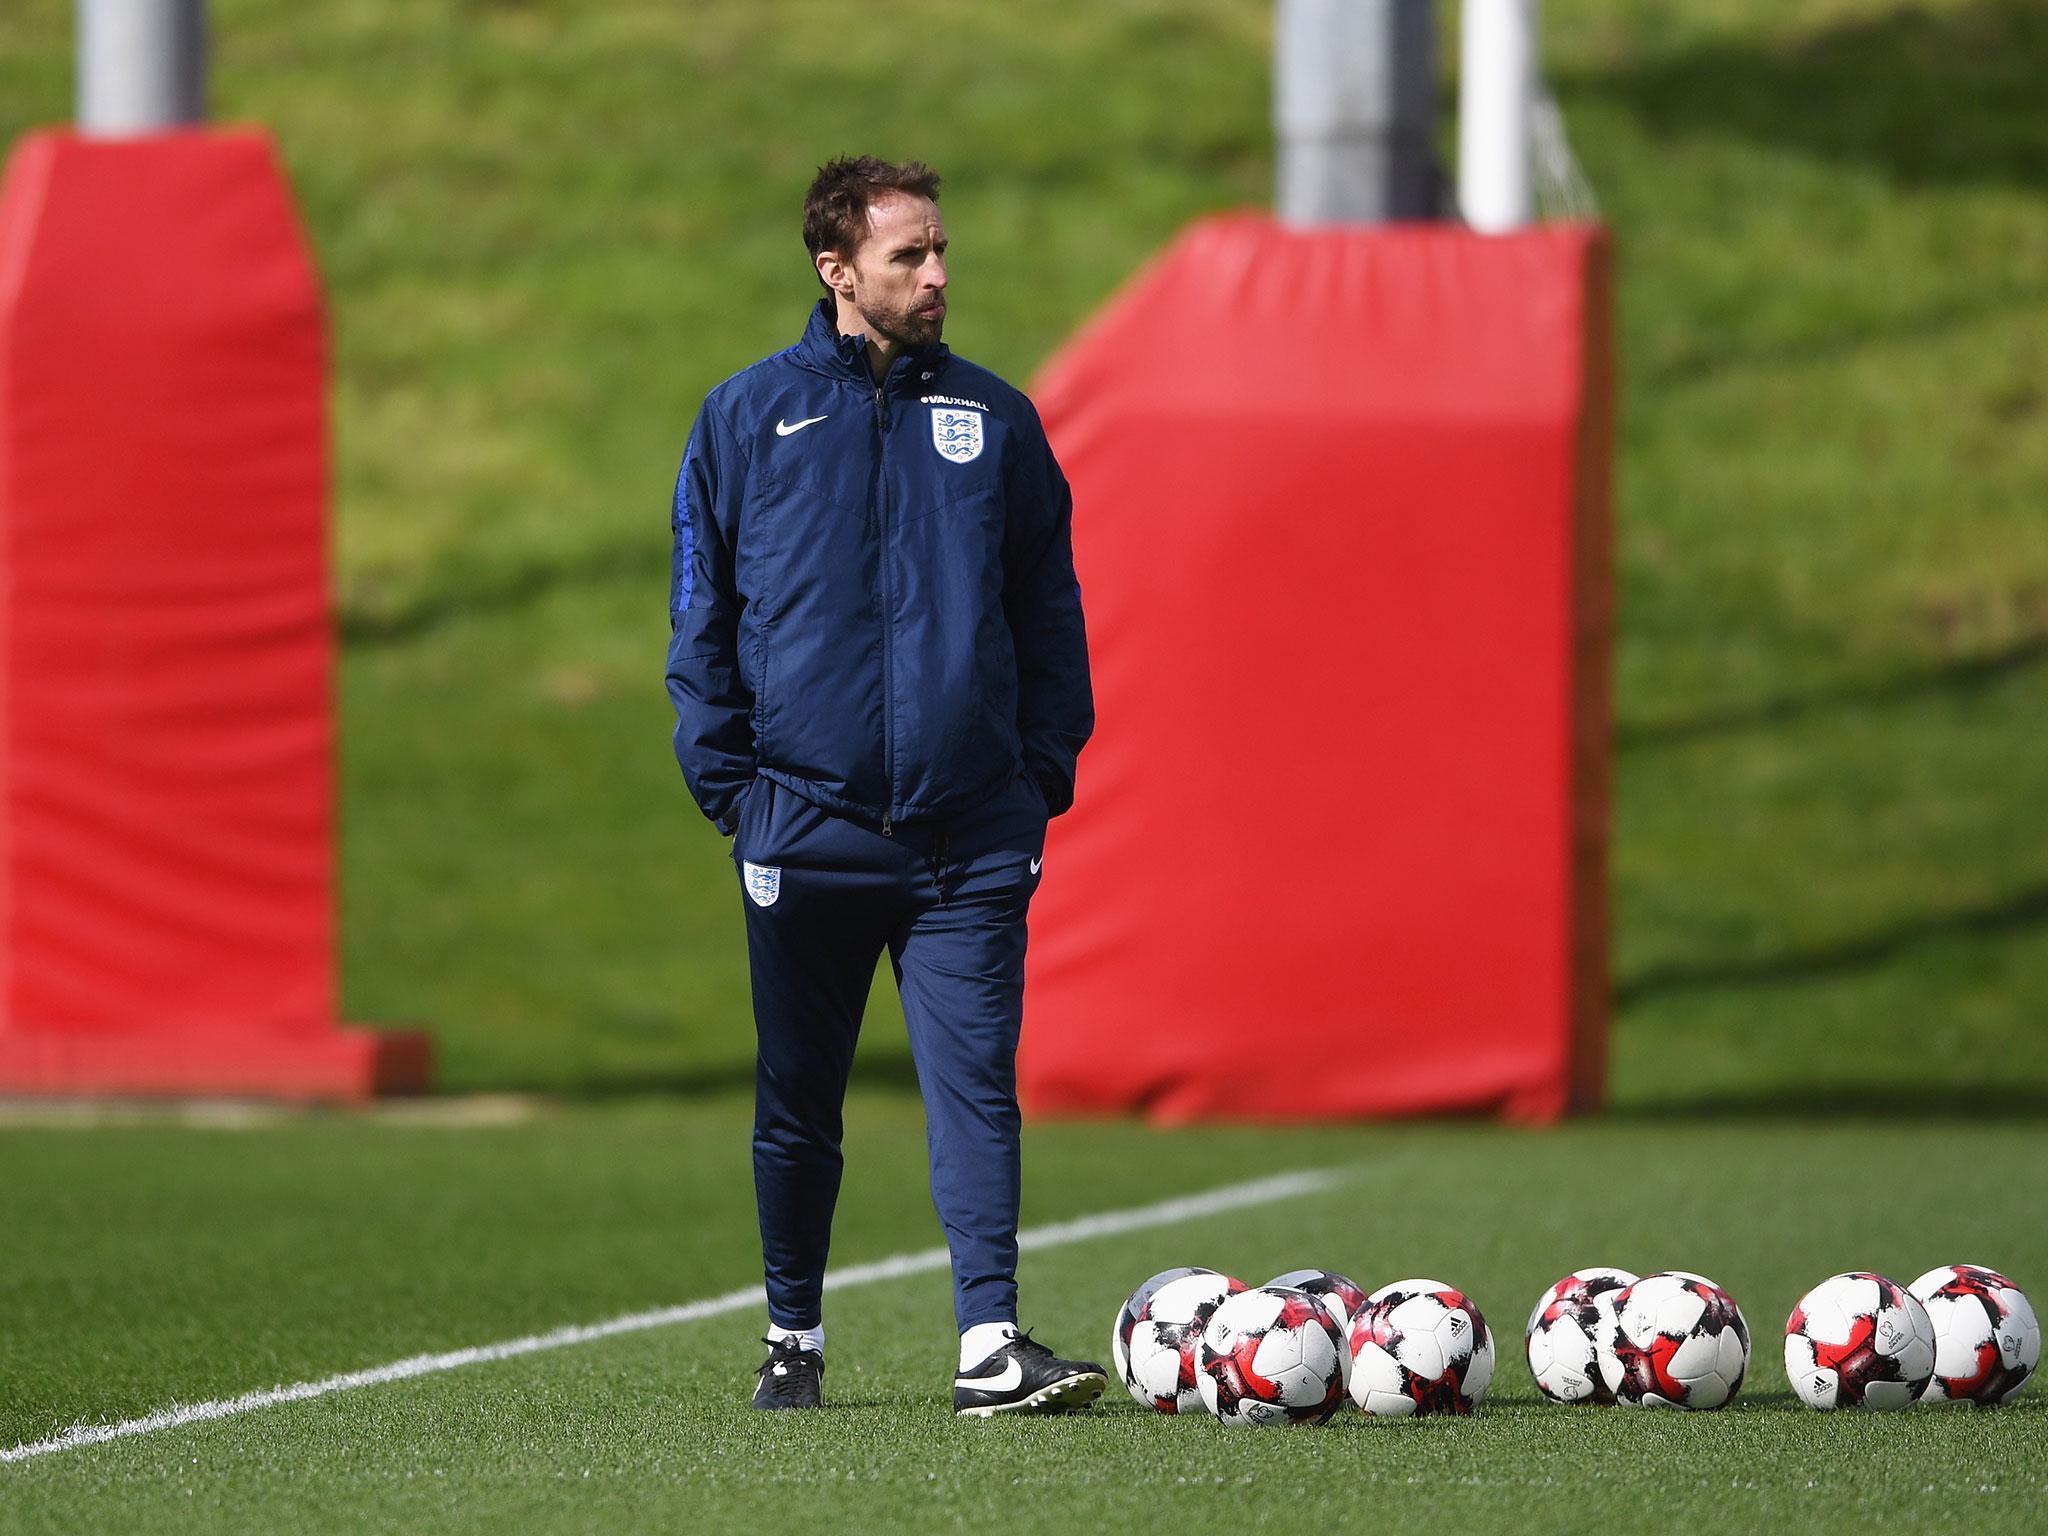 Southgate has also said England must adopt a winning mentality